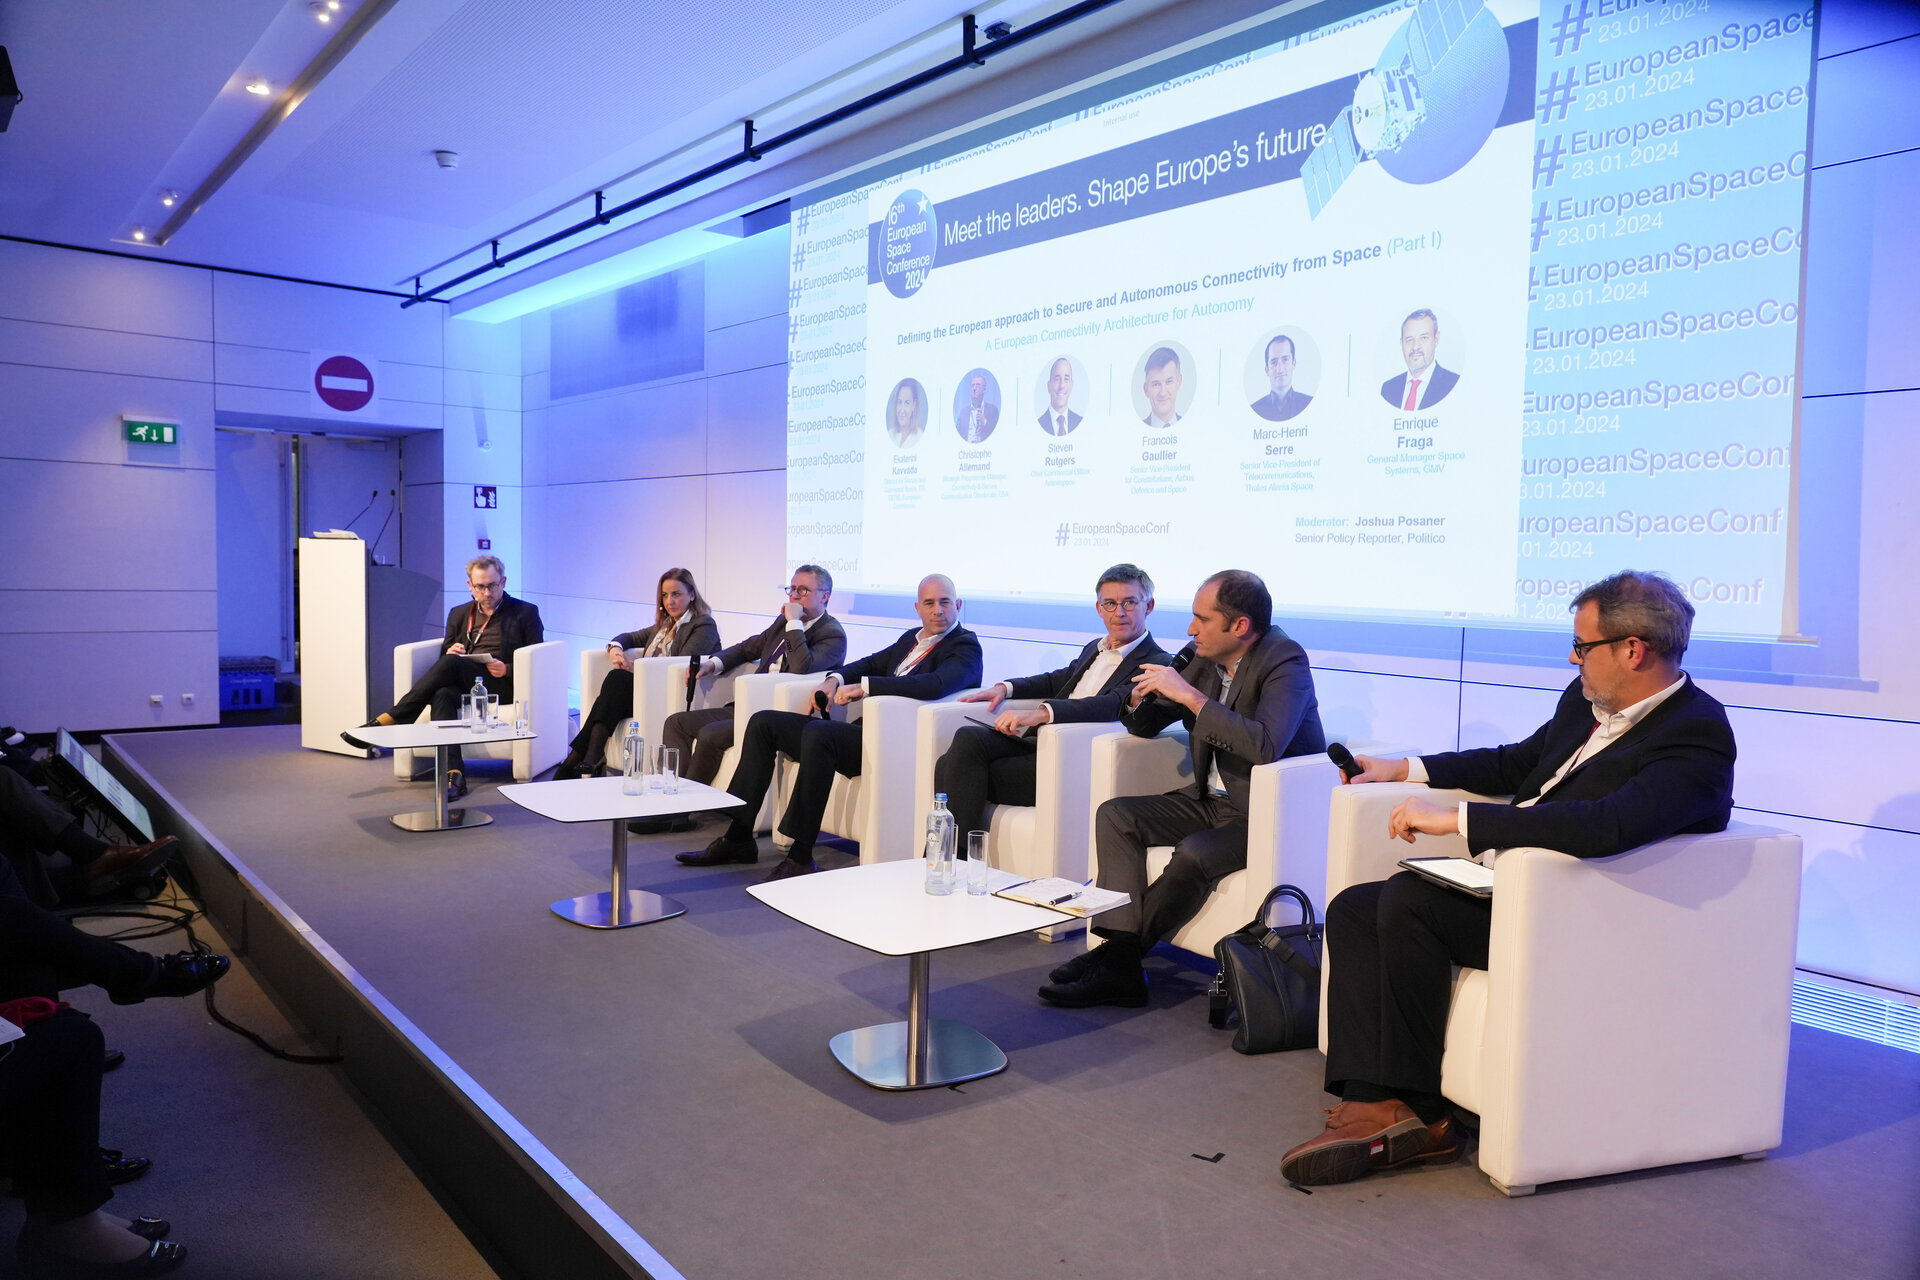 Panel members during the session "Defining the European approach to Secure and Autonomous Connectivity from Space".